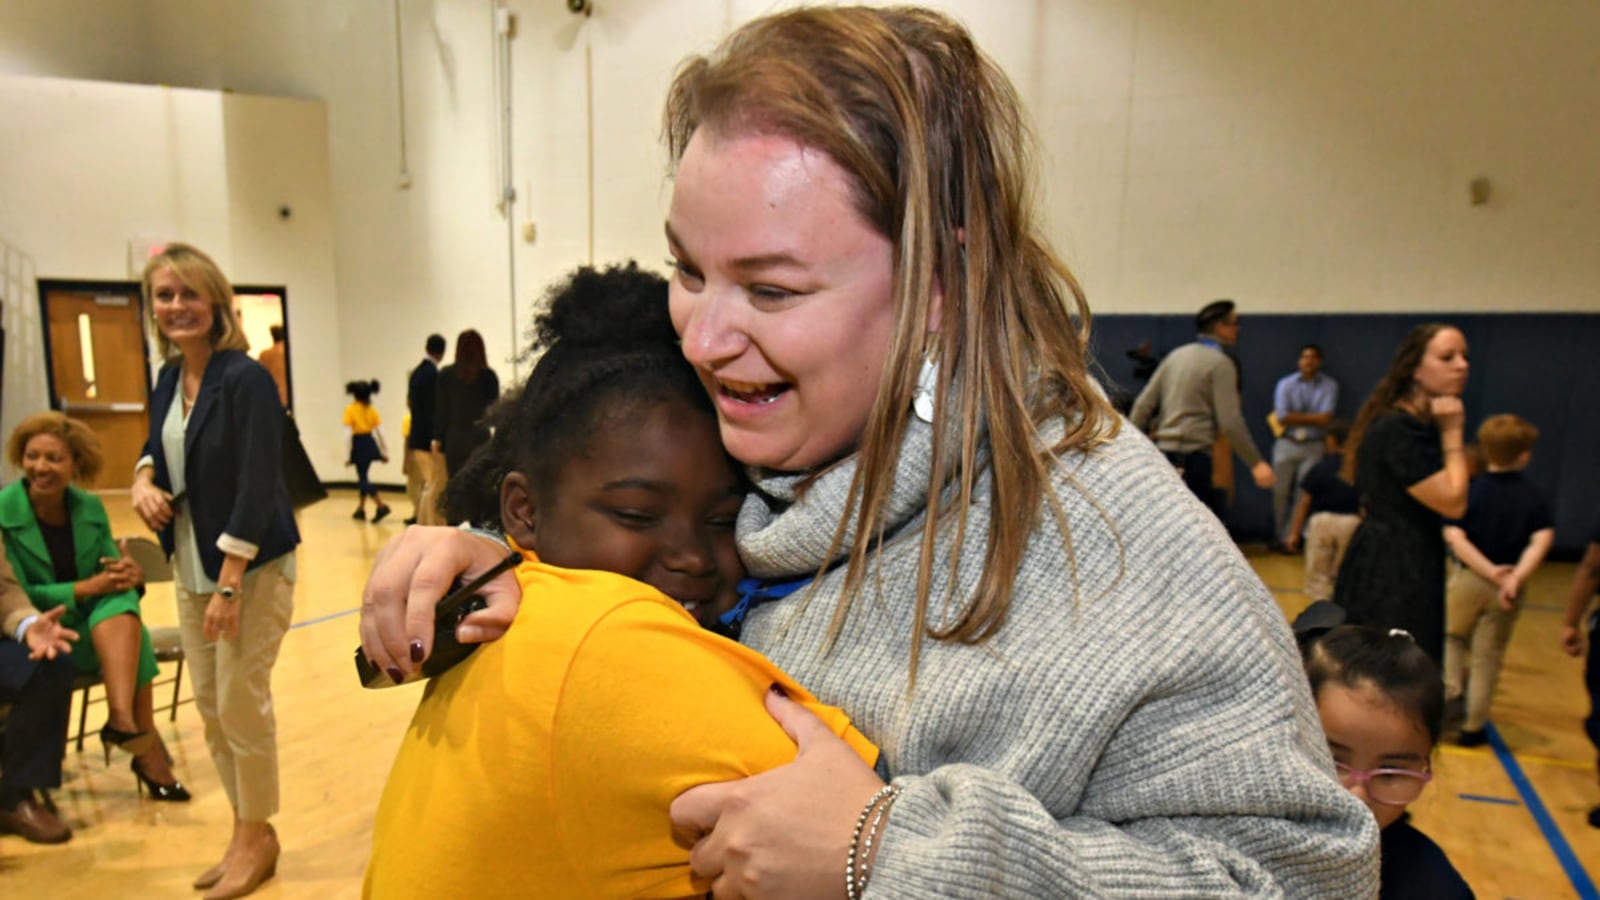 Shelly Gaughan teaches at East End Prep charter school in Nashville Public Schools and was one of two Tennessee teachers honored with a Milken Educator Award this school year.